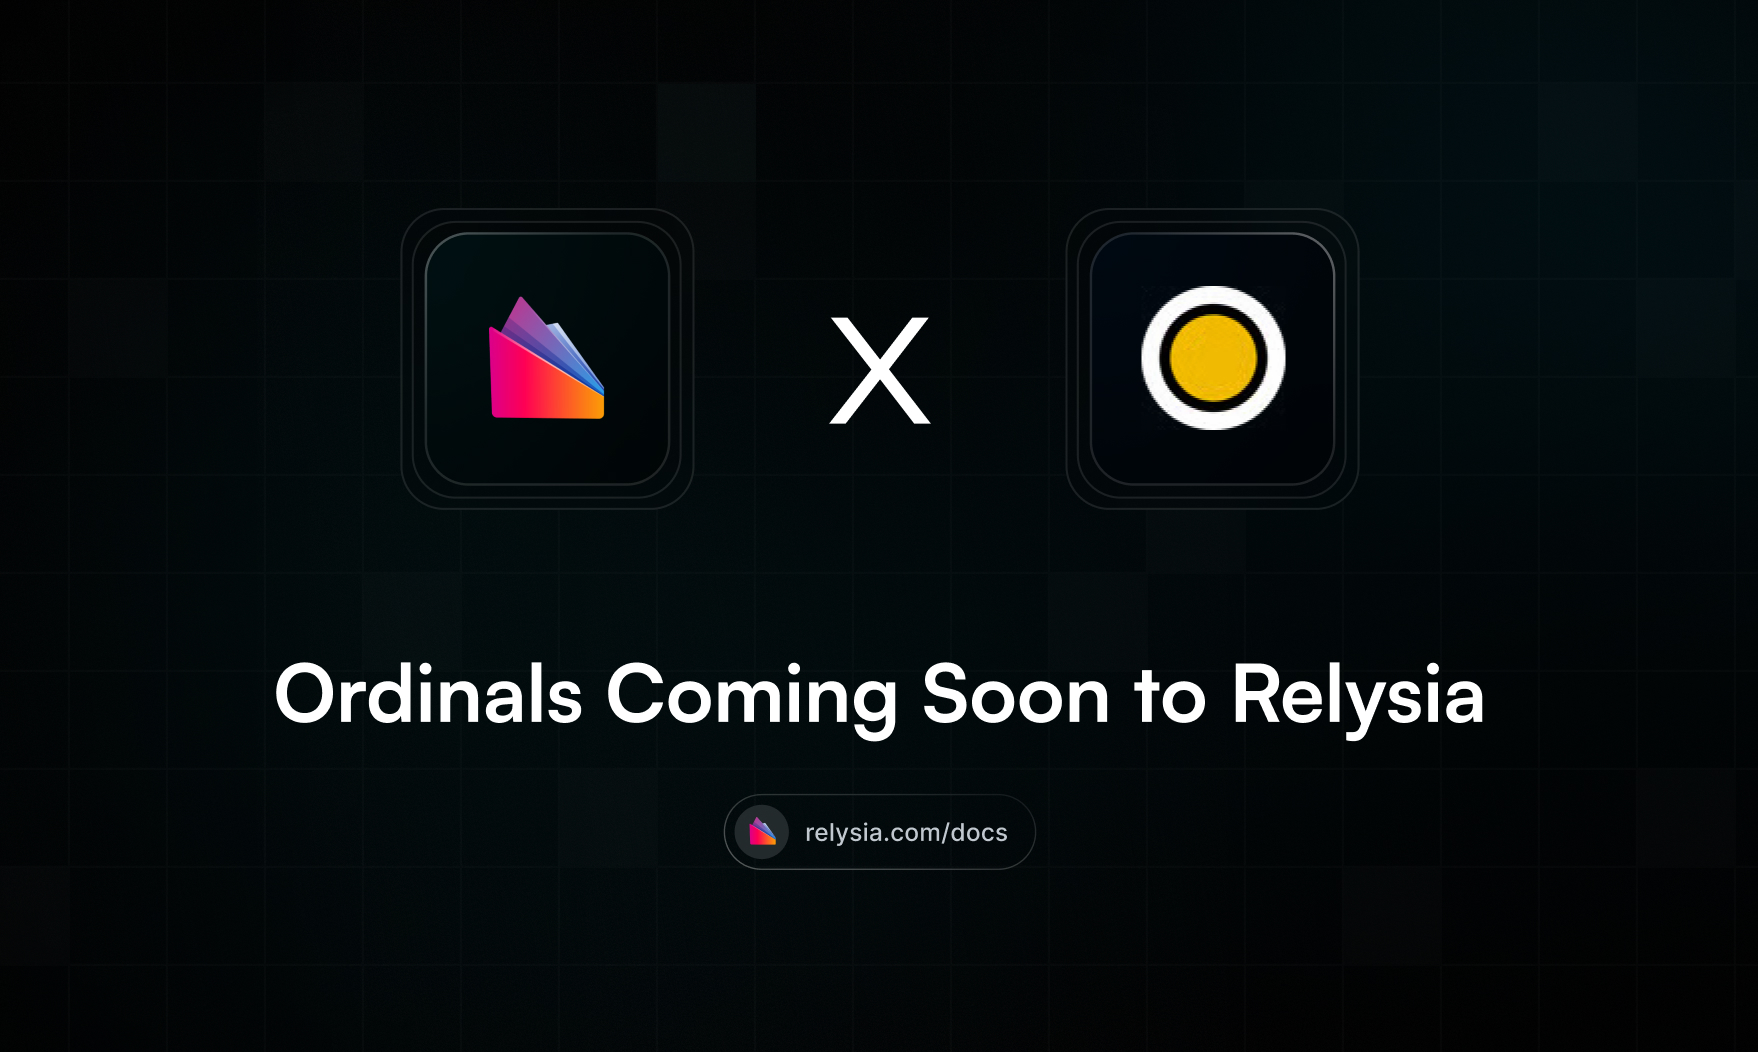 Ordinals Coming Soon to Relysia